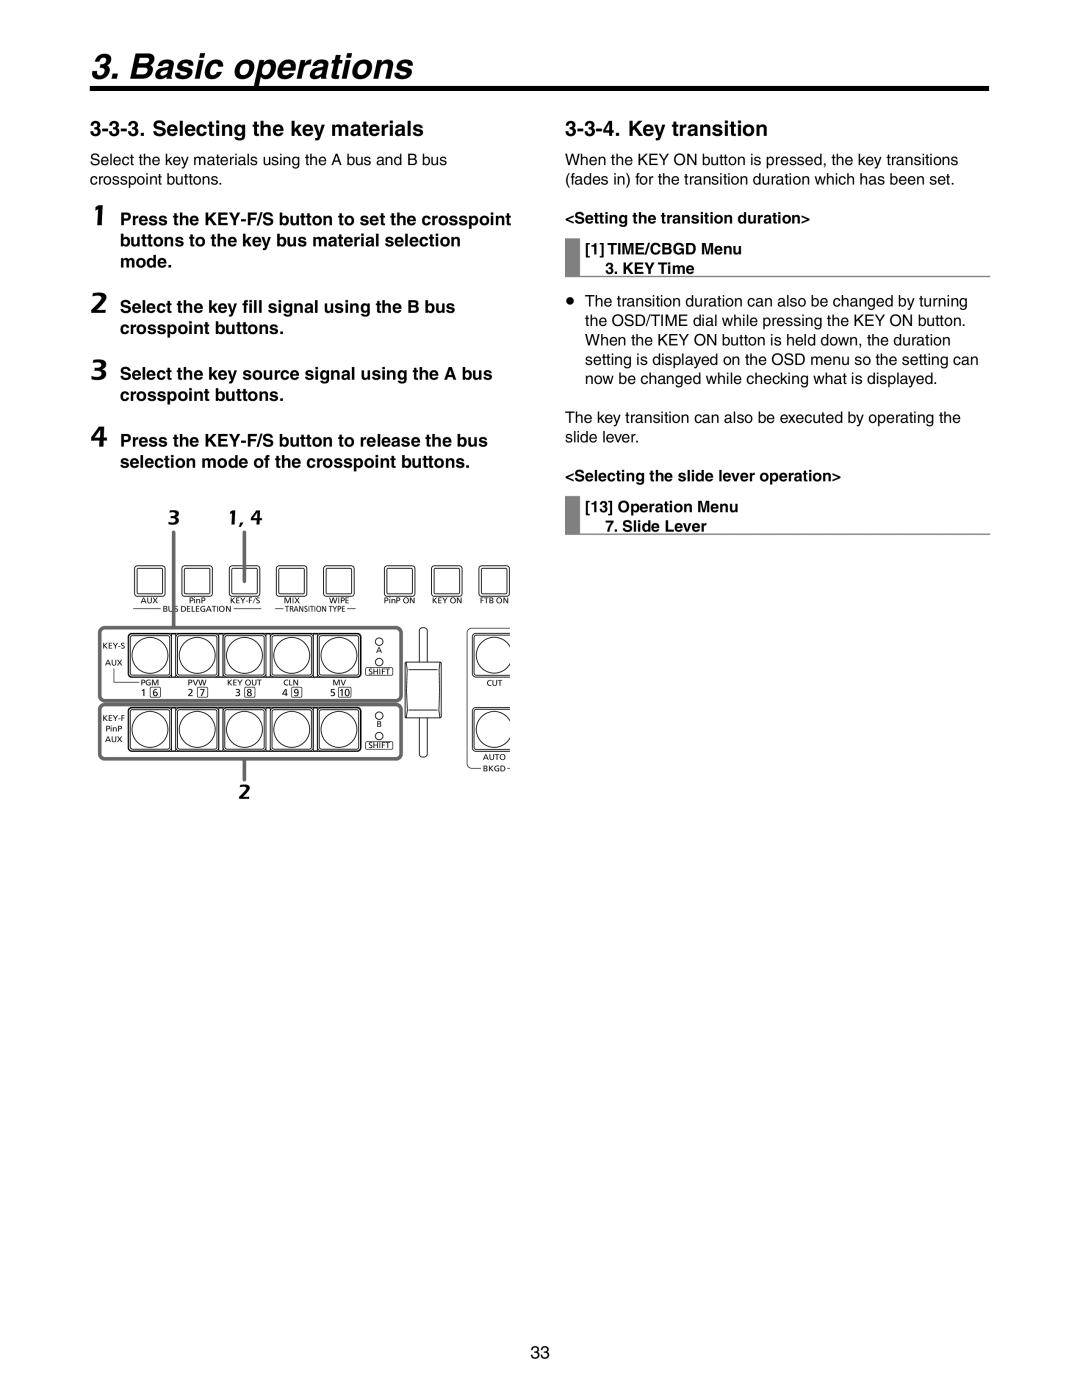 Panasonic AW-HS50N operating instructions Selecting the key materials, Key transition, Basic operations 